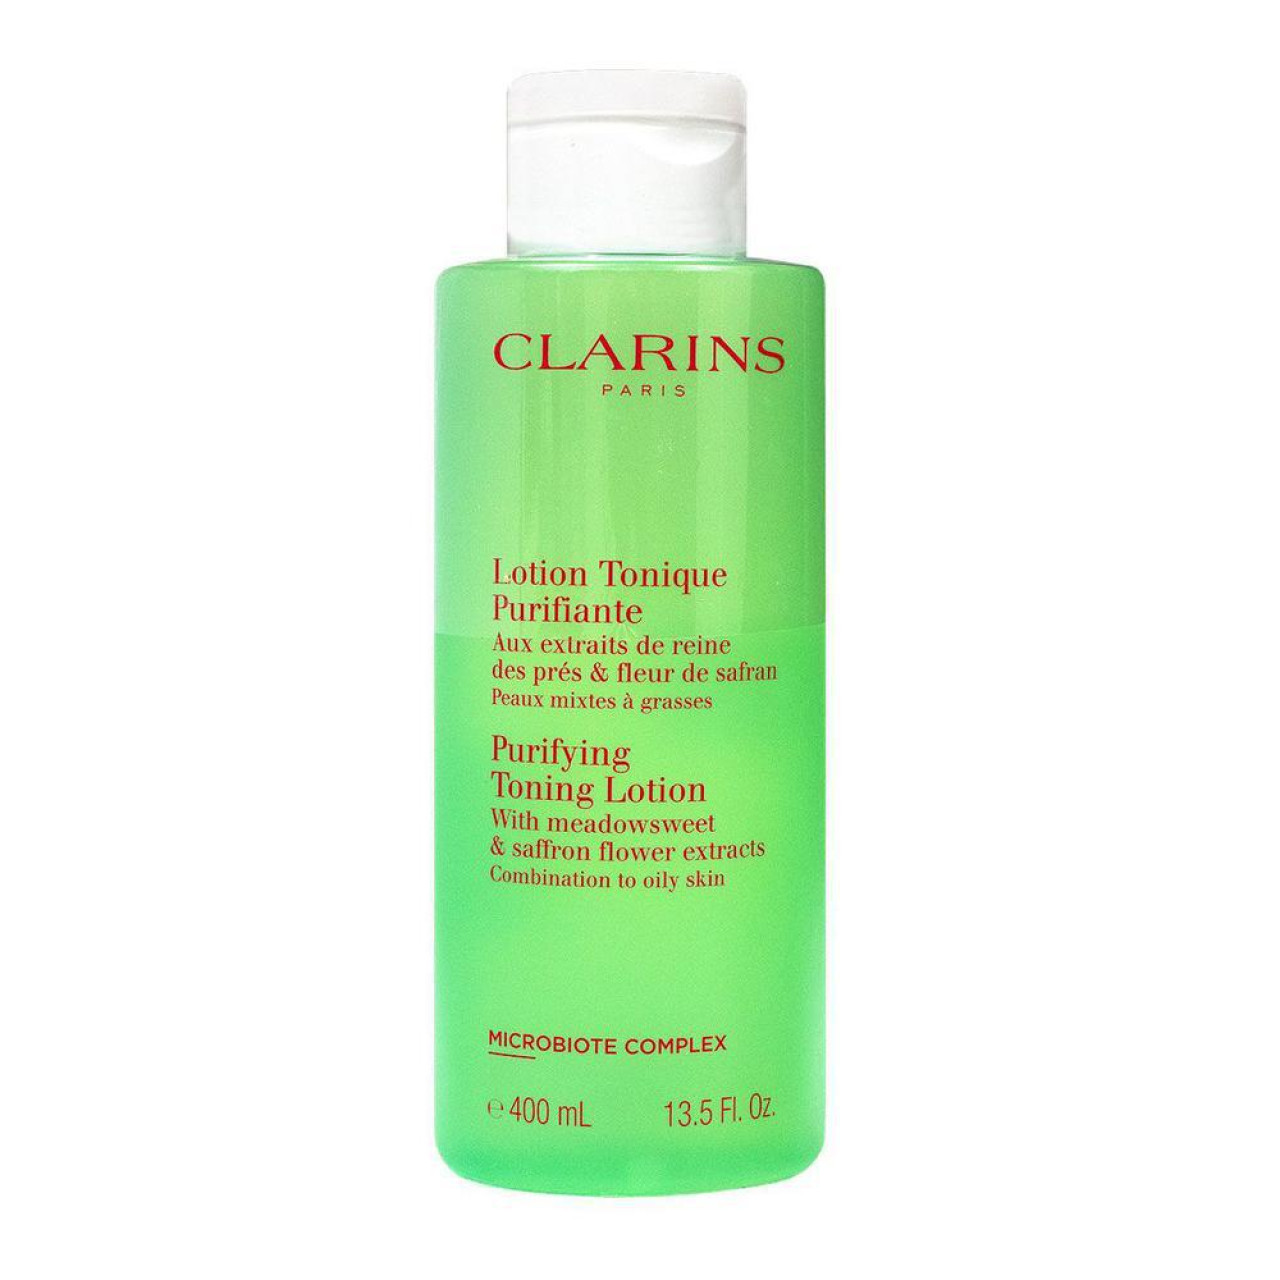 Clarins purifying tonic lotion 400ml